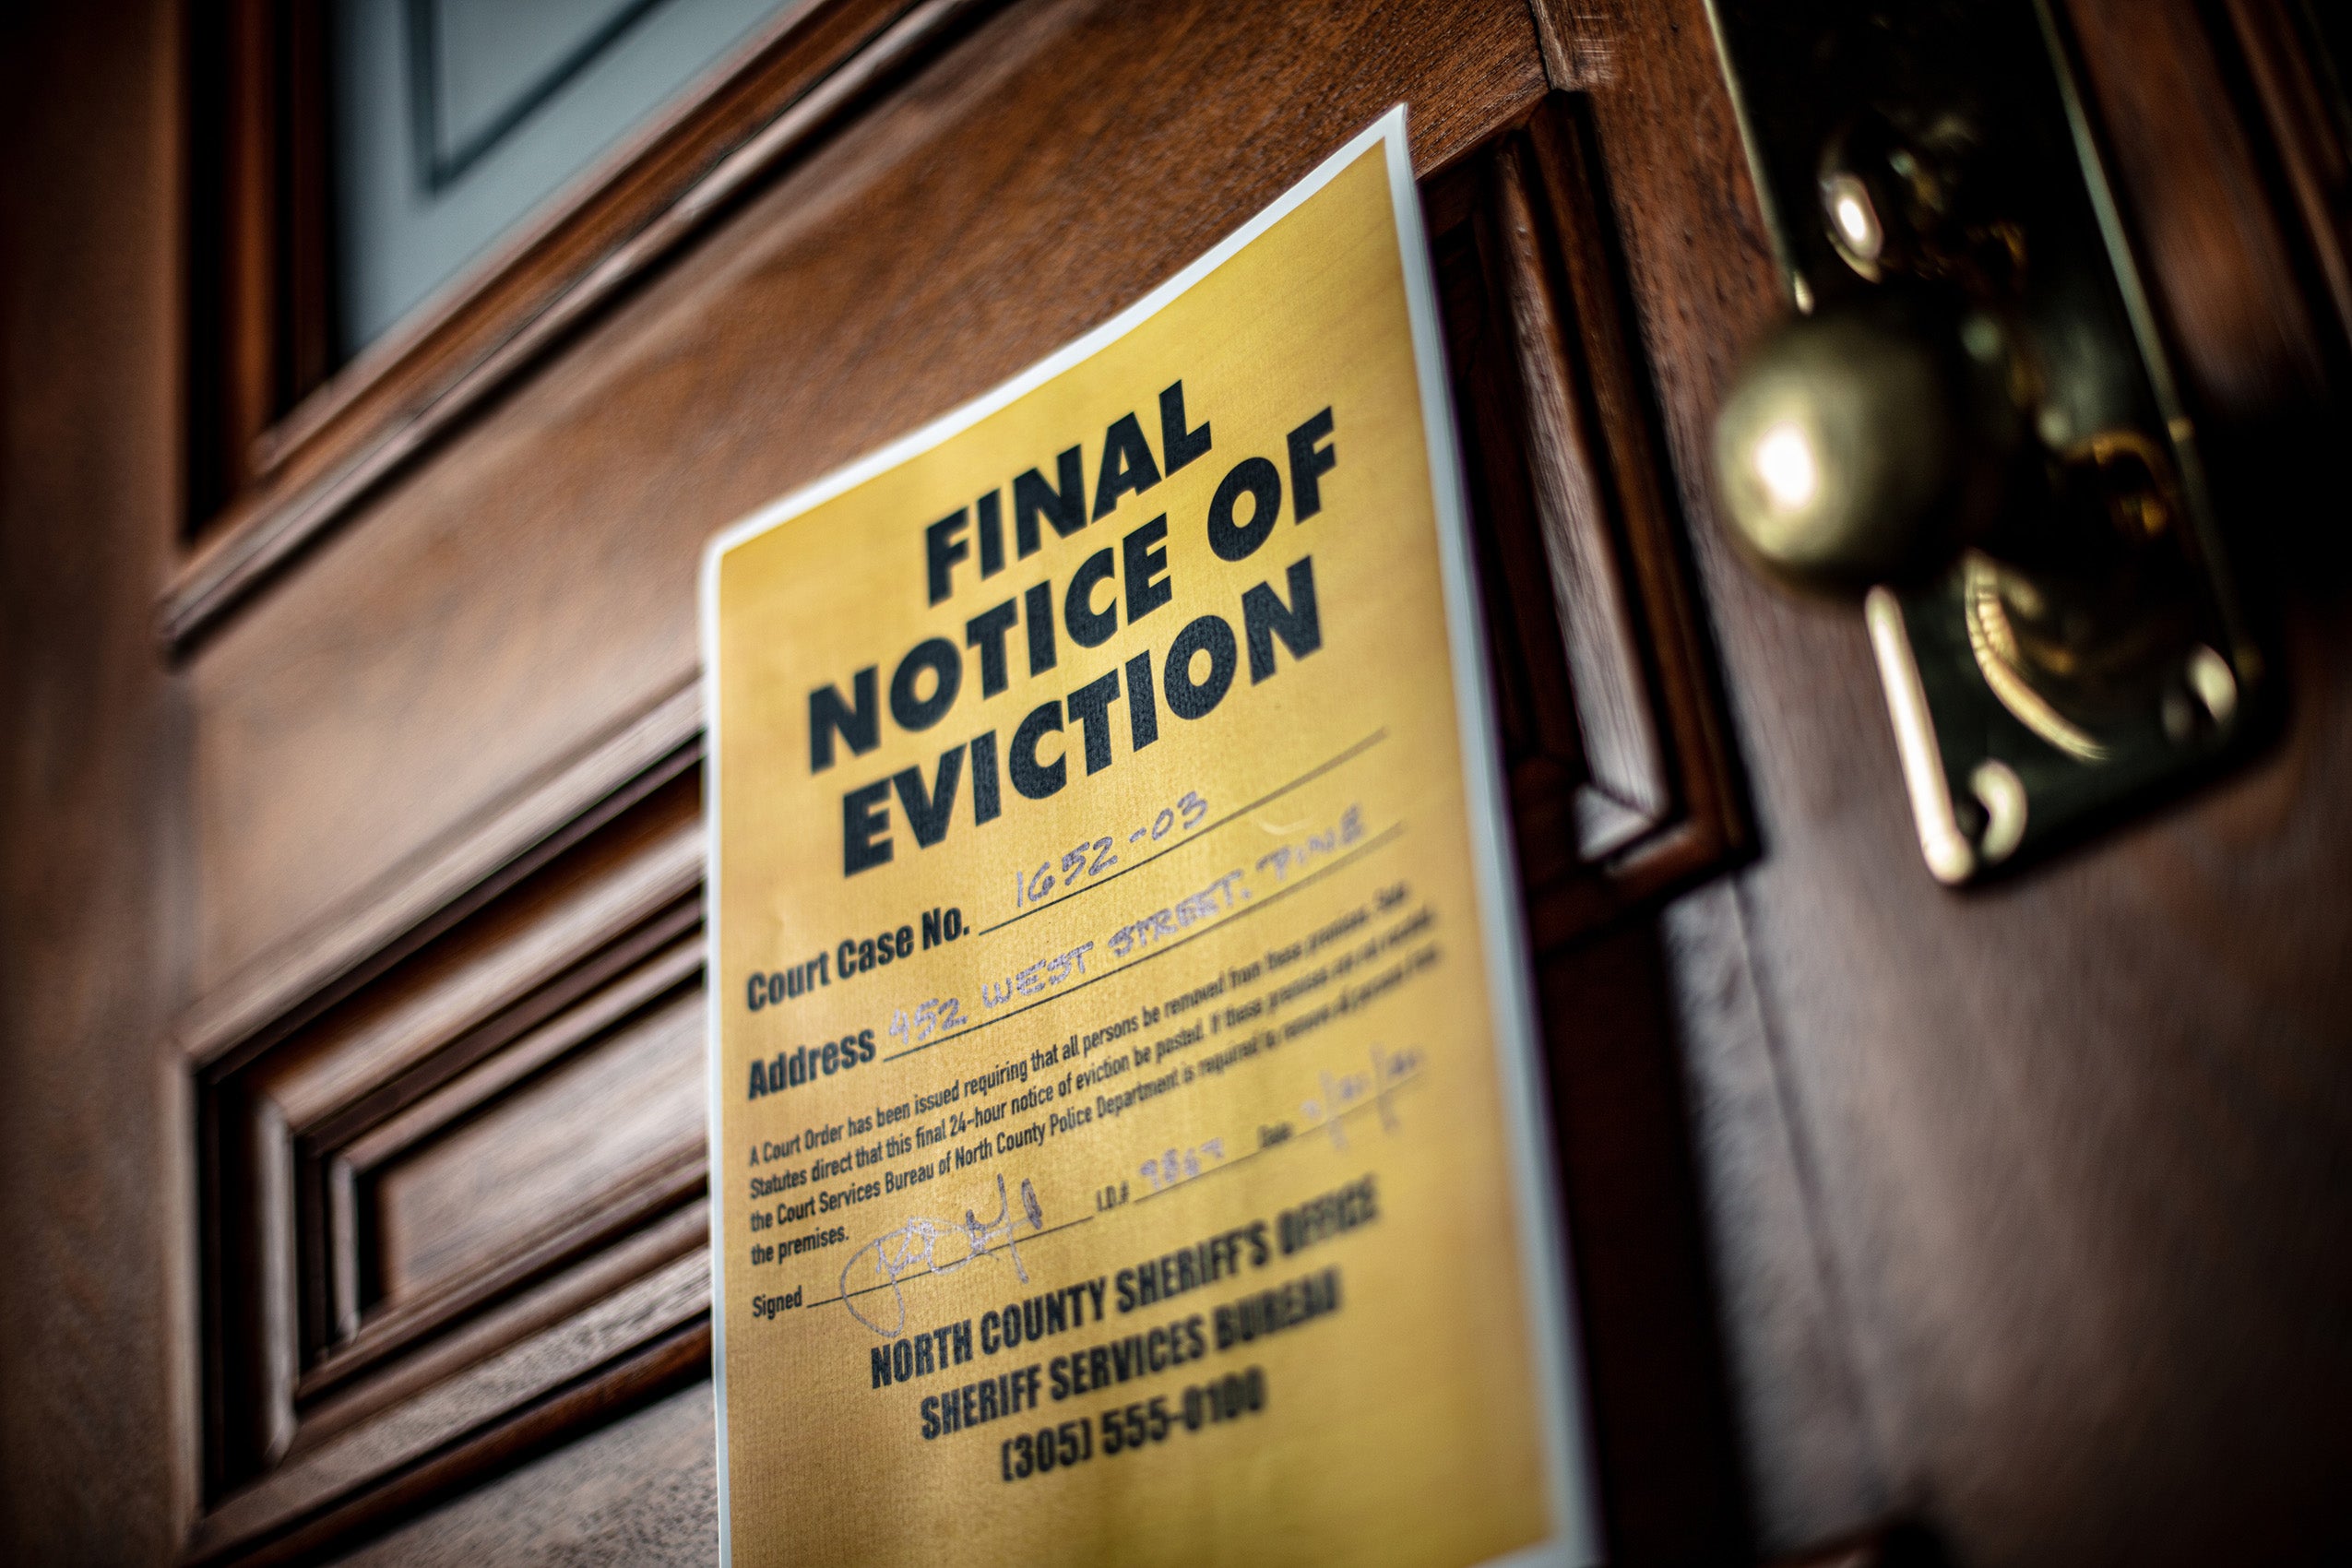 Notice of eviction on door of house